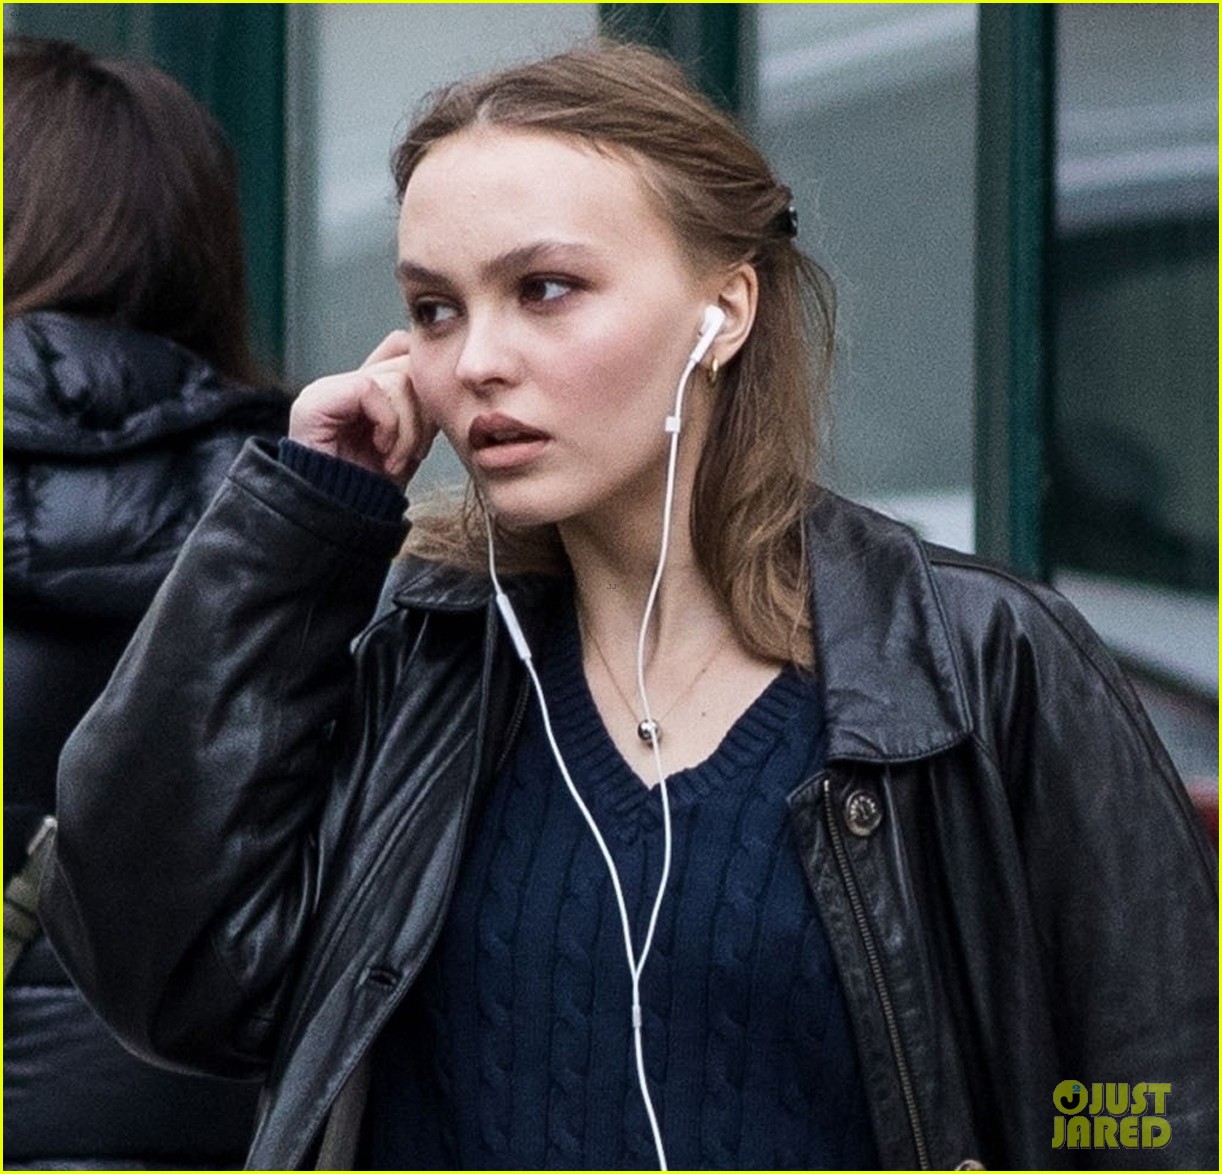 Lily-Rose Depp Heads Out in Paris After 'Dreamland' Movie News | Photo ...